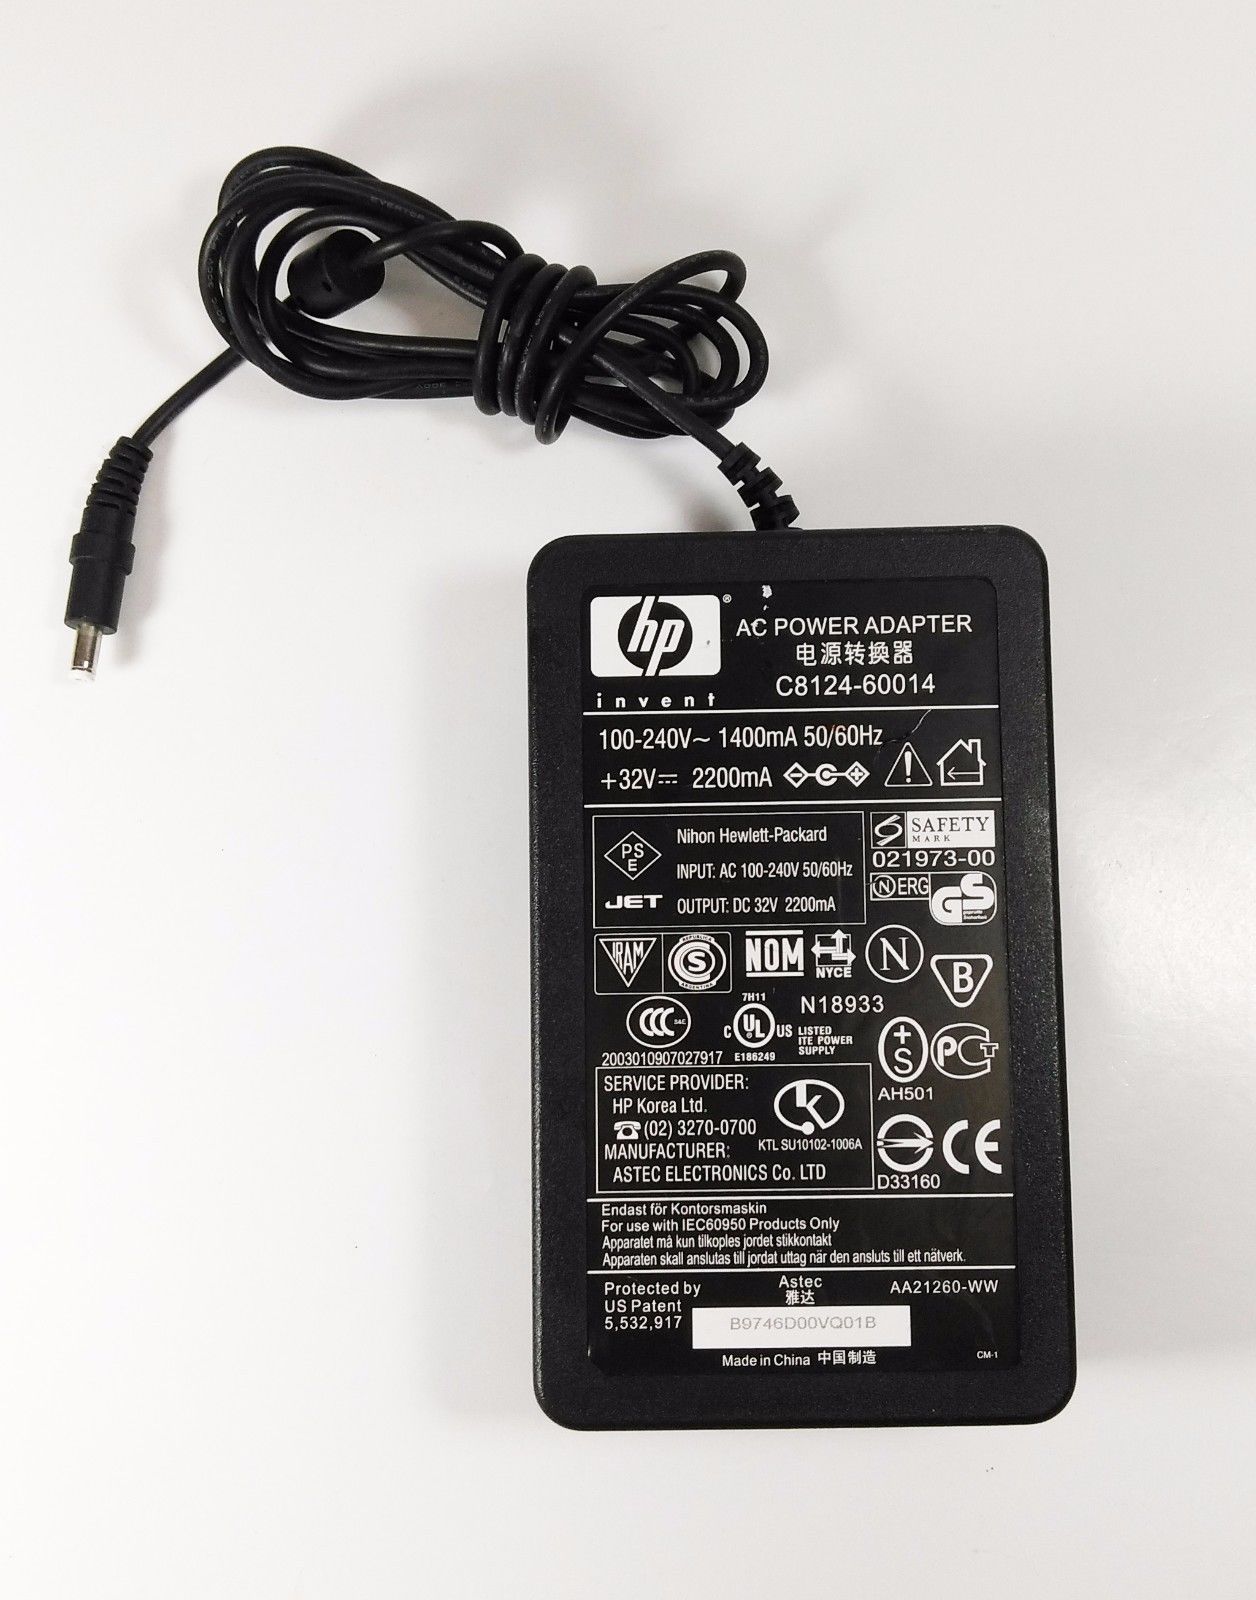 32V 2200mA 70W HP DeskJet C9004A Printer AC Power Adapter Charger